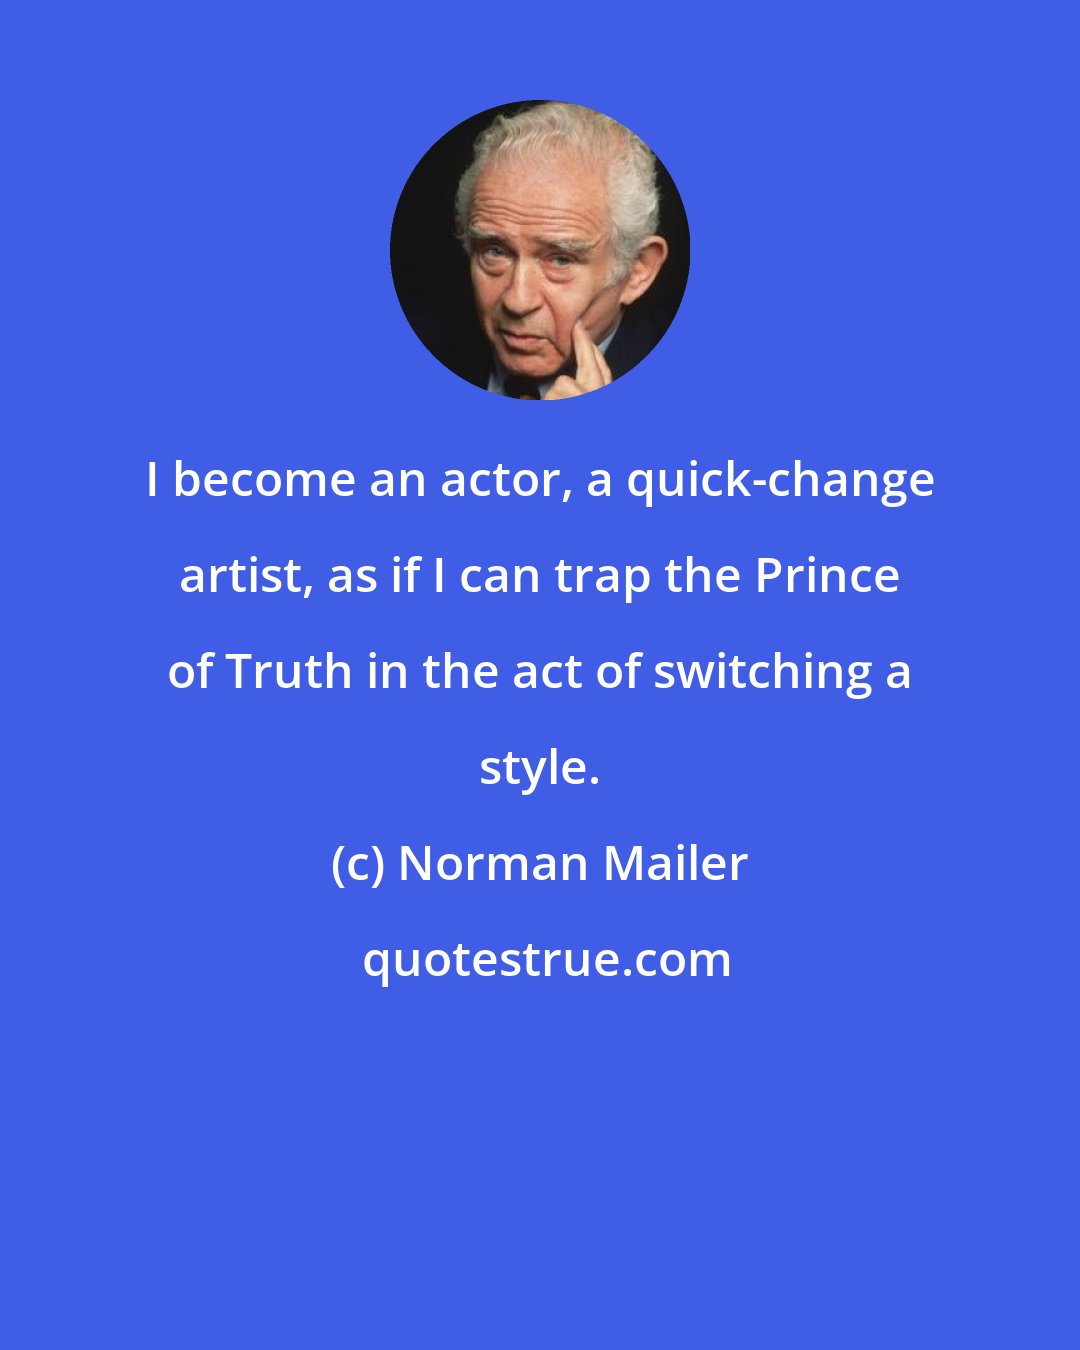 Norman Mailer: I become an actor, a quick-change artist, as if I can trap the Prince of Truth in the act of switching a style.